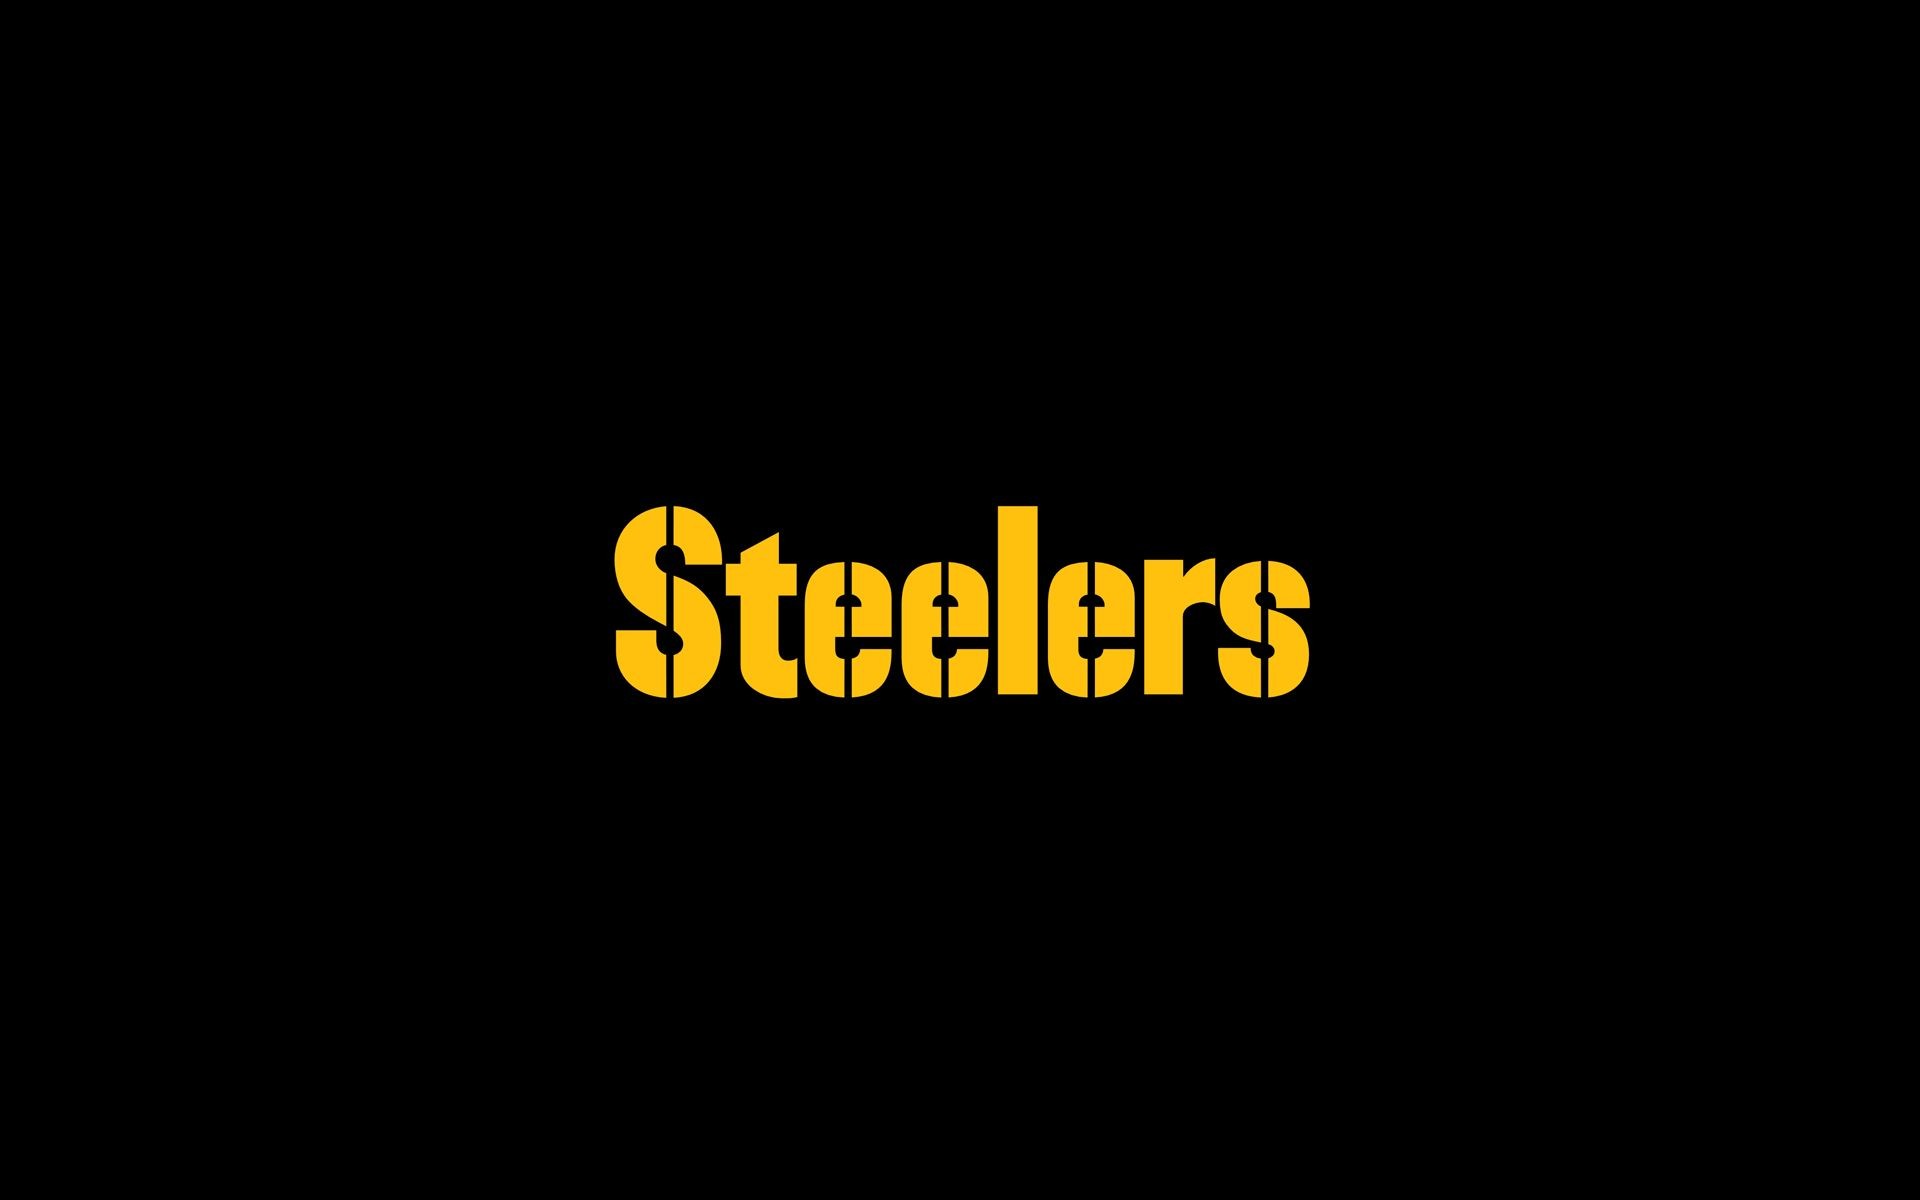 Steelers Wallpaper For Android